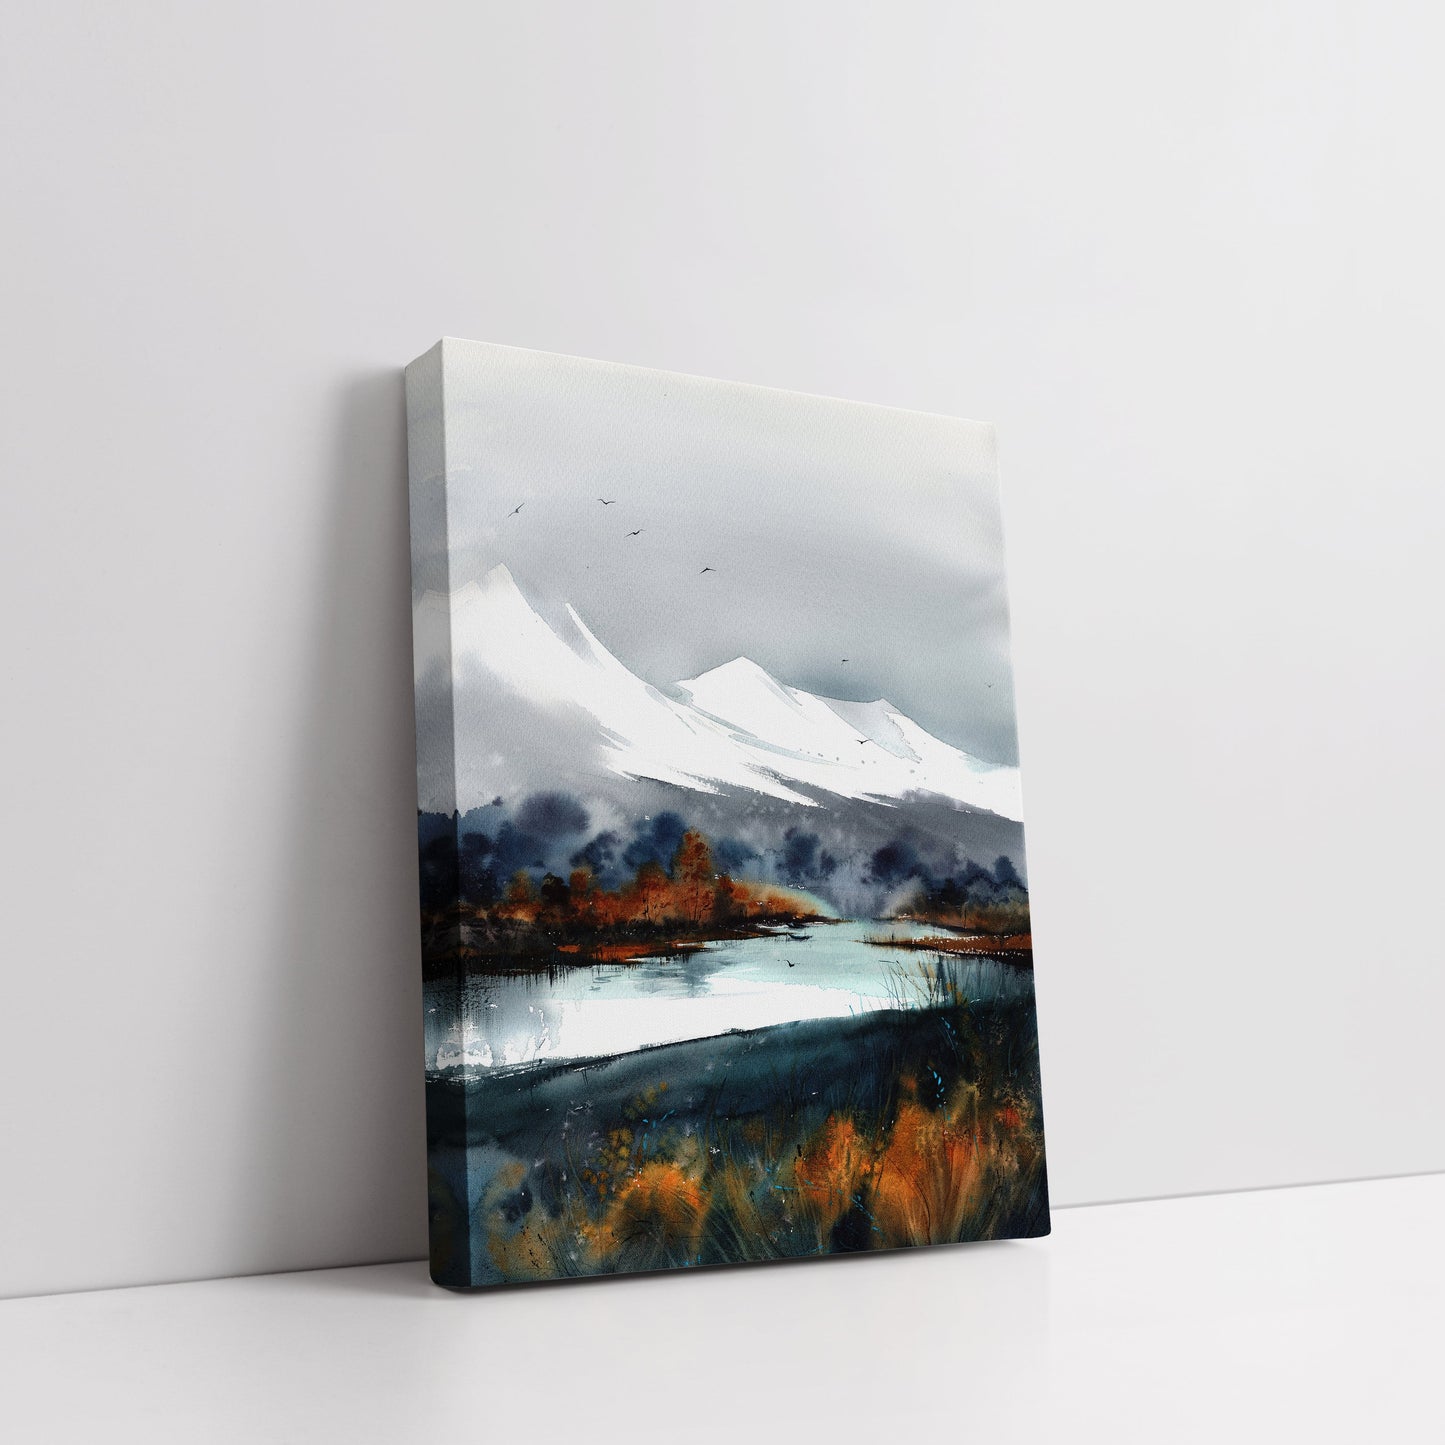 Abstract Fall Mountain Set of 2 Pieces, Nature Wall Art Prints, Modern Design Decor, Autumn Mountain Painting, Giclee Large Canvas Print